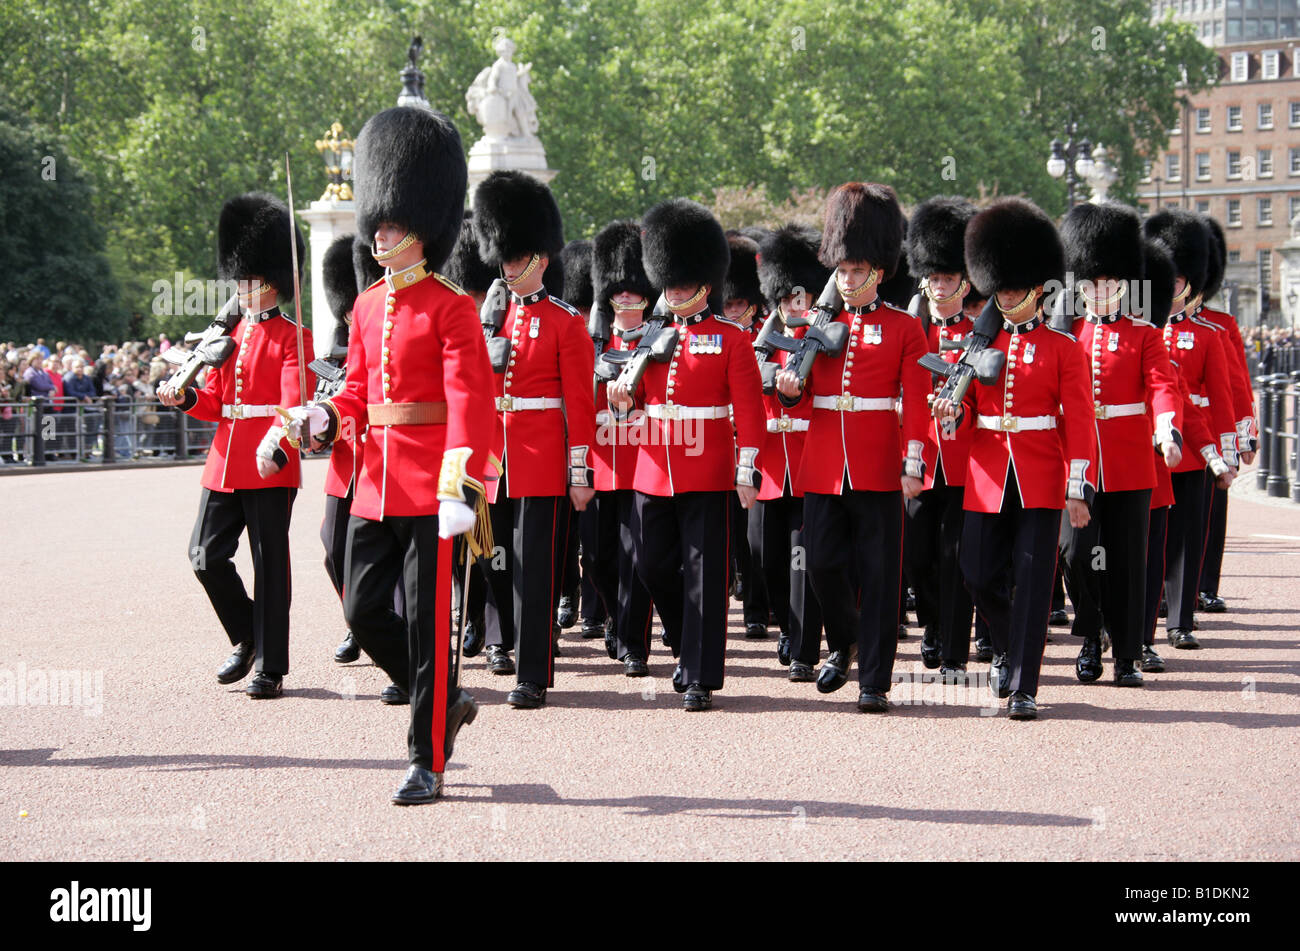 Coldstream Guards, Buckingham Palace, London, Trooping the Colour Ceremony June 14th 2008 Stock Photo